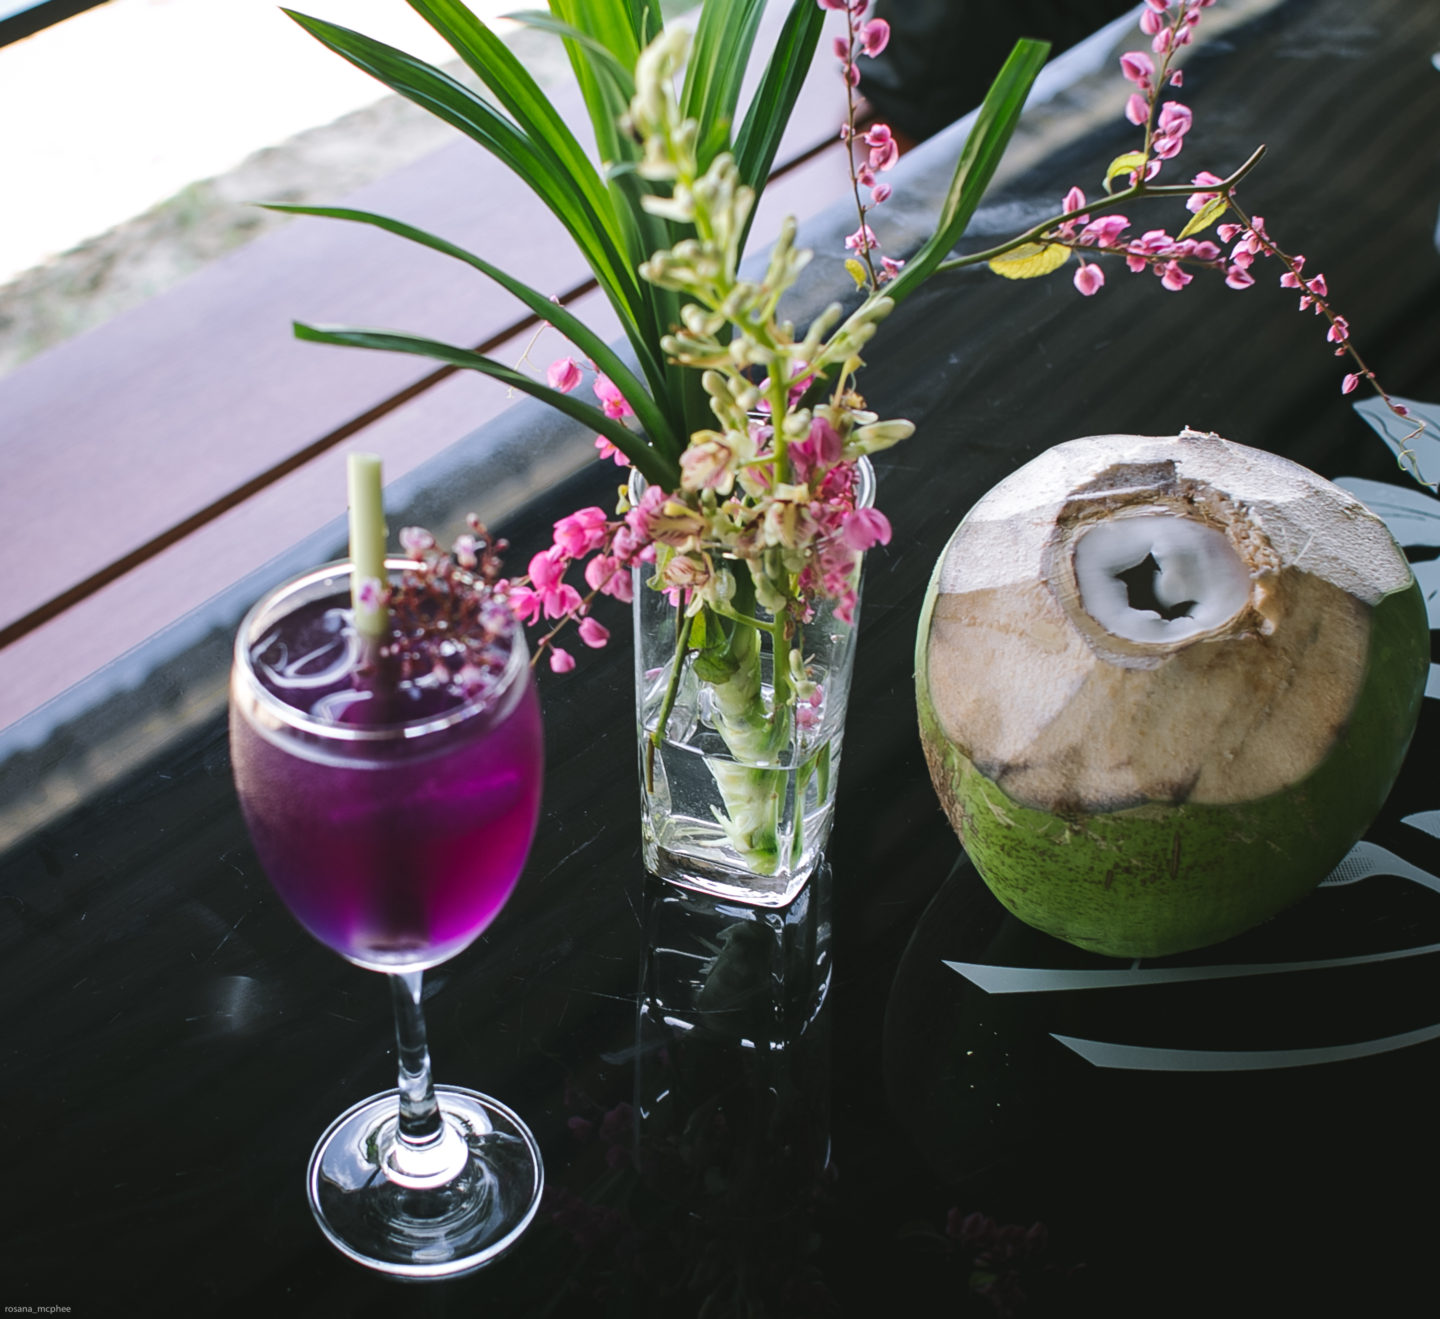 Blue flower drink in Thailand at Red Rocket Farm, a gastronomic experience beyond Bangkok